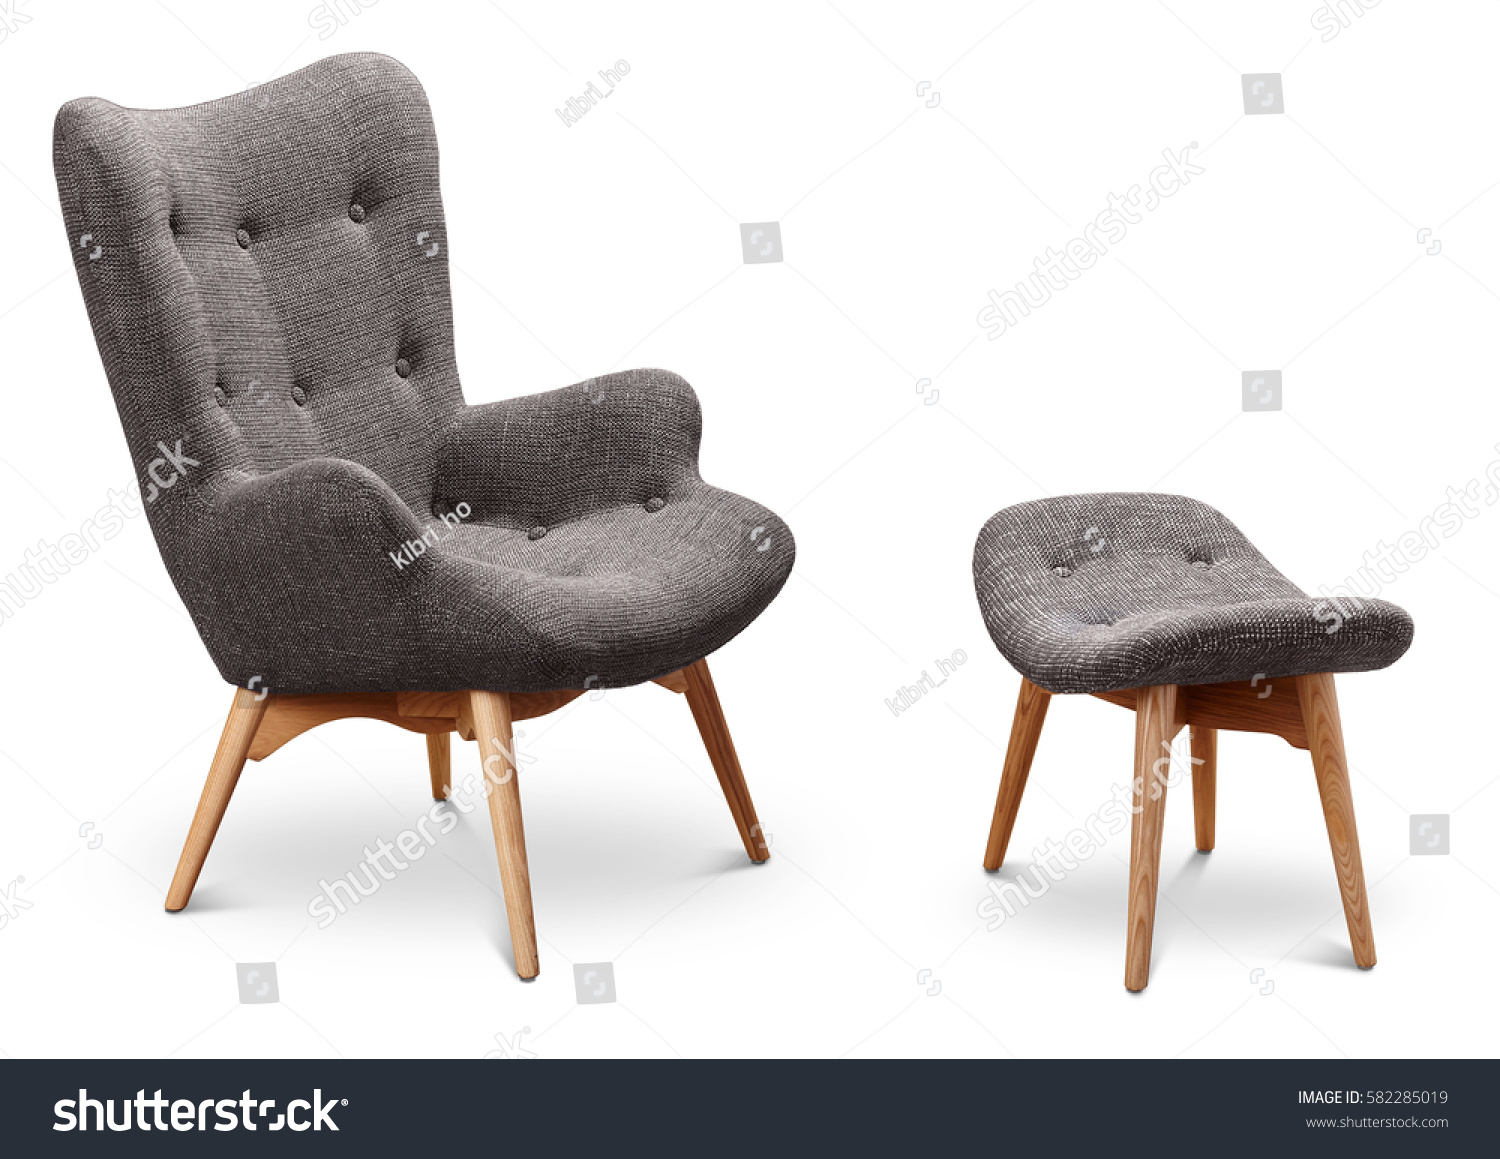 Gray color armchair and small chair for legs. Modern designer armchair on white background. Textile armchair and chair. Series of furniture. #582285019